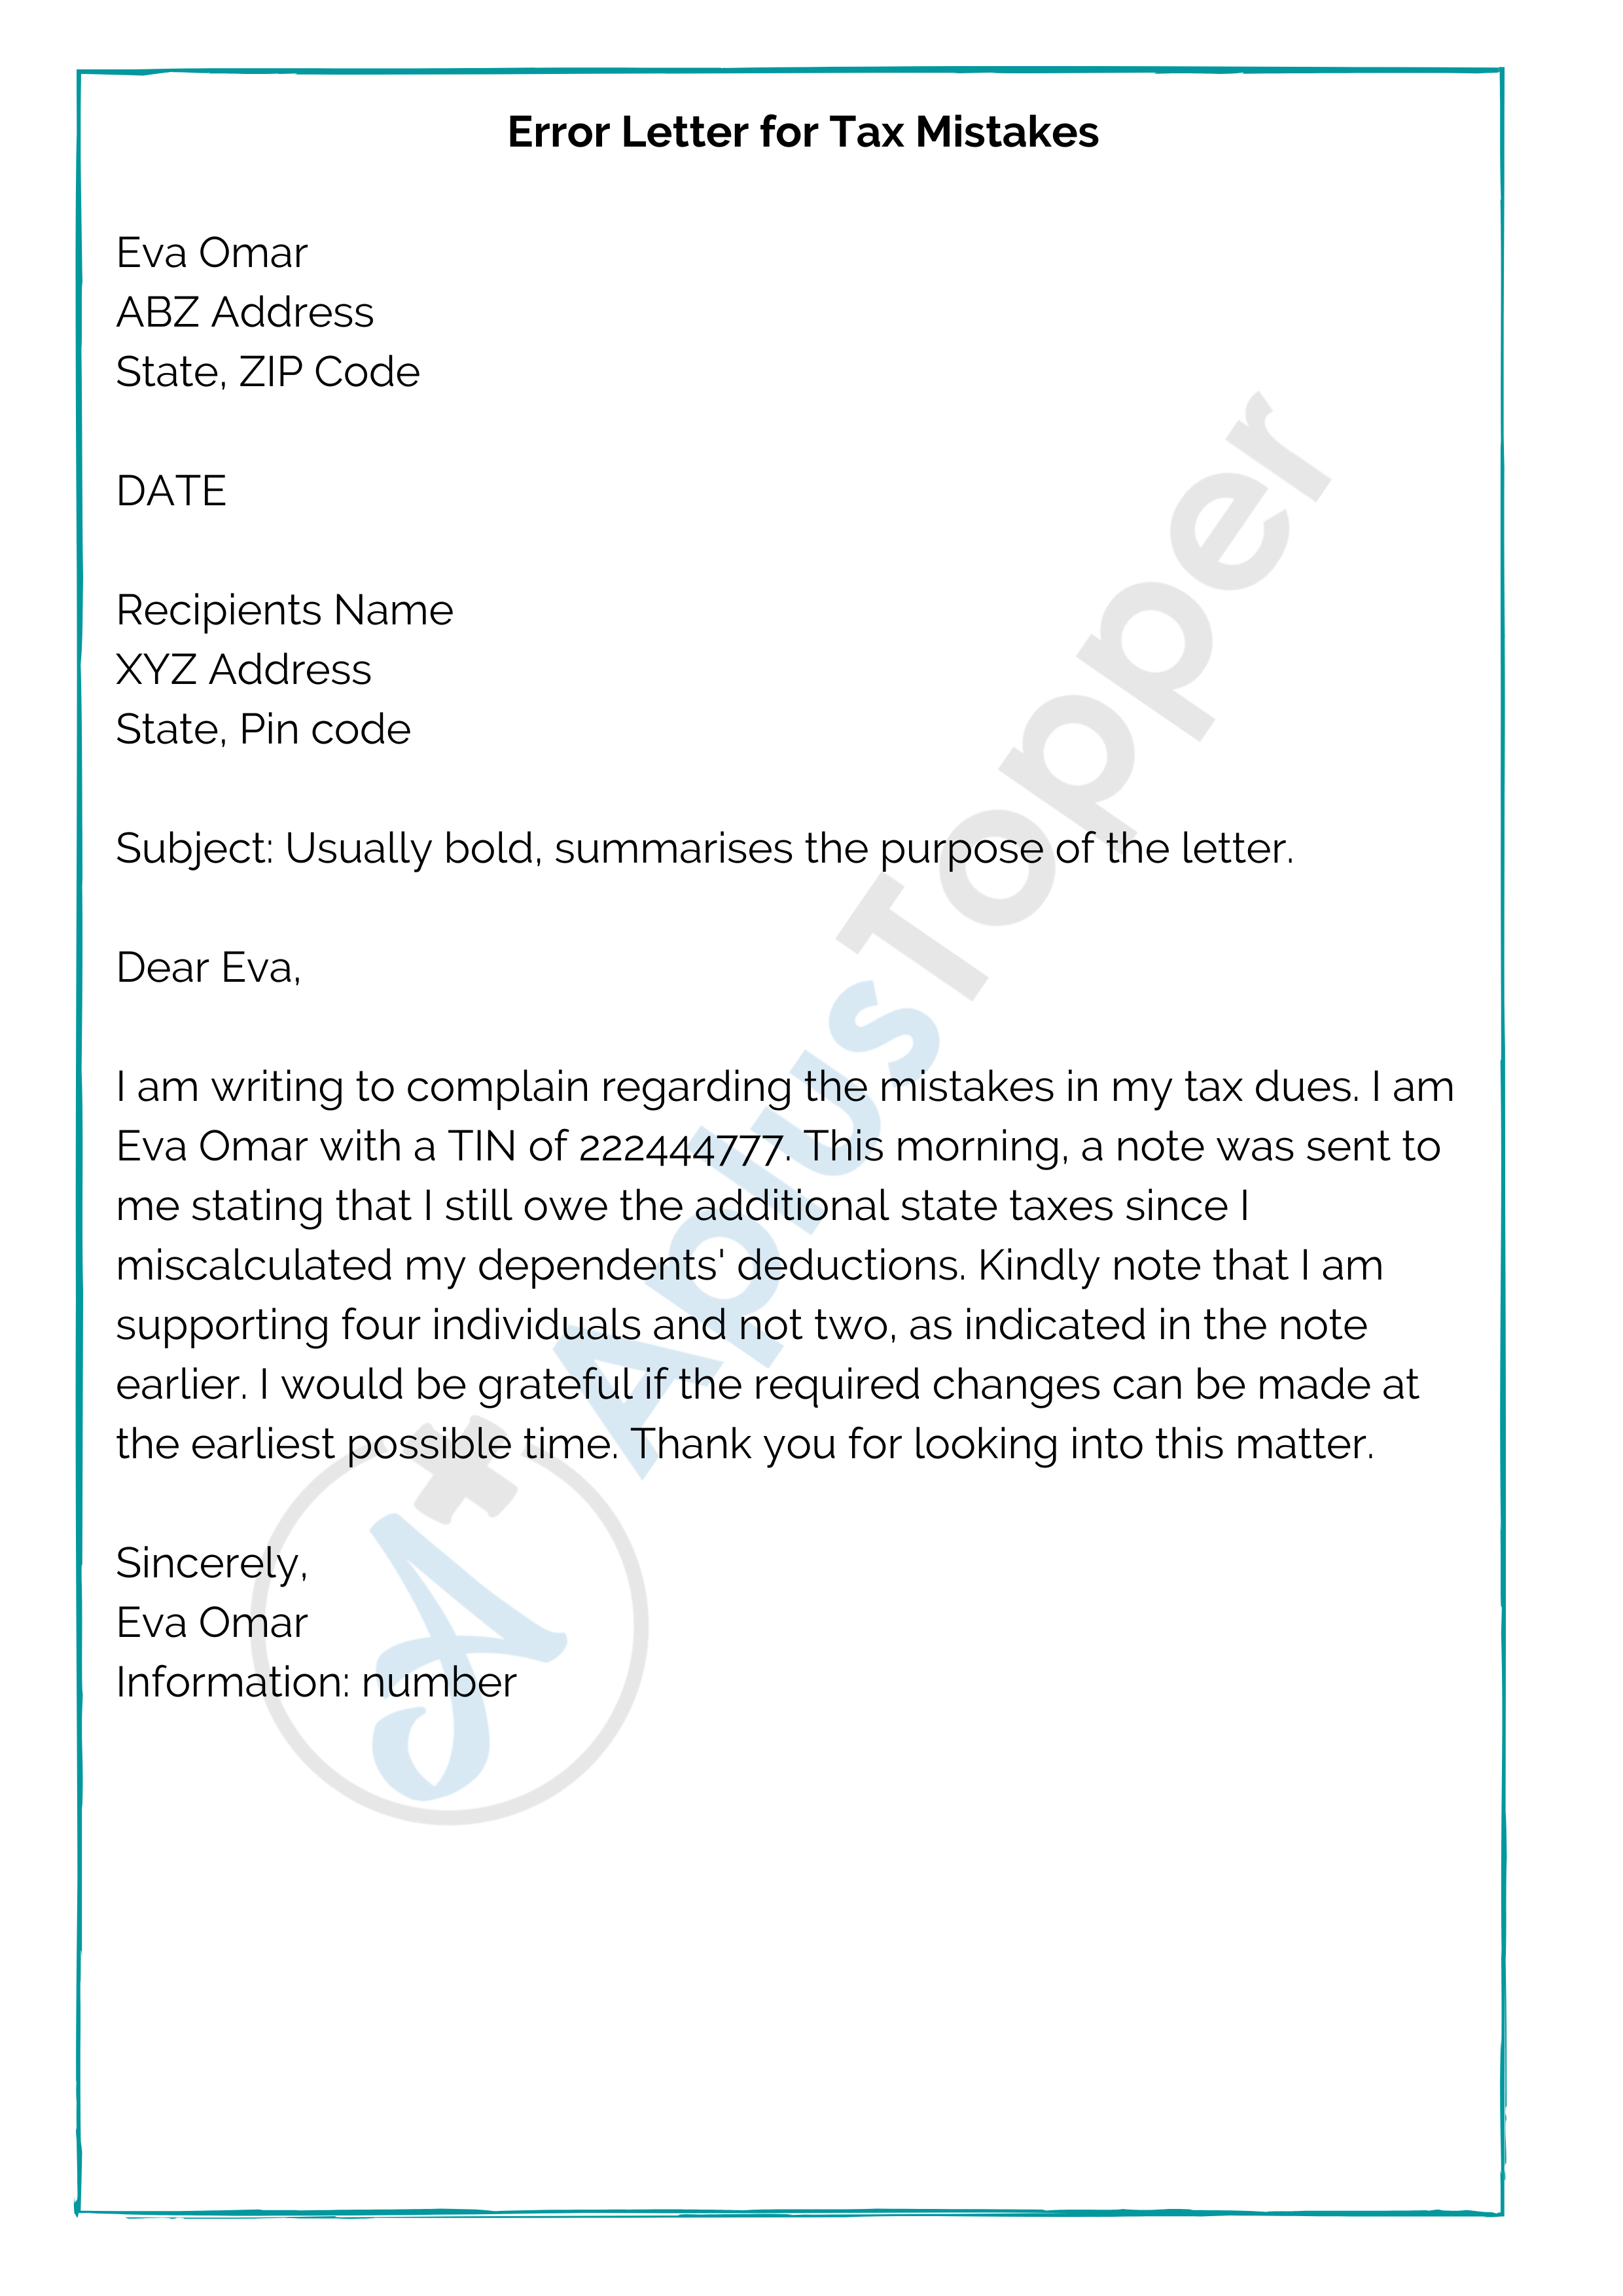 Error Letter for Tax Mistakes